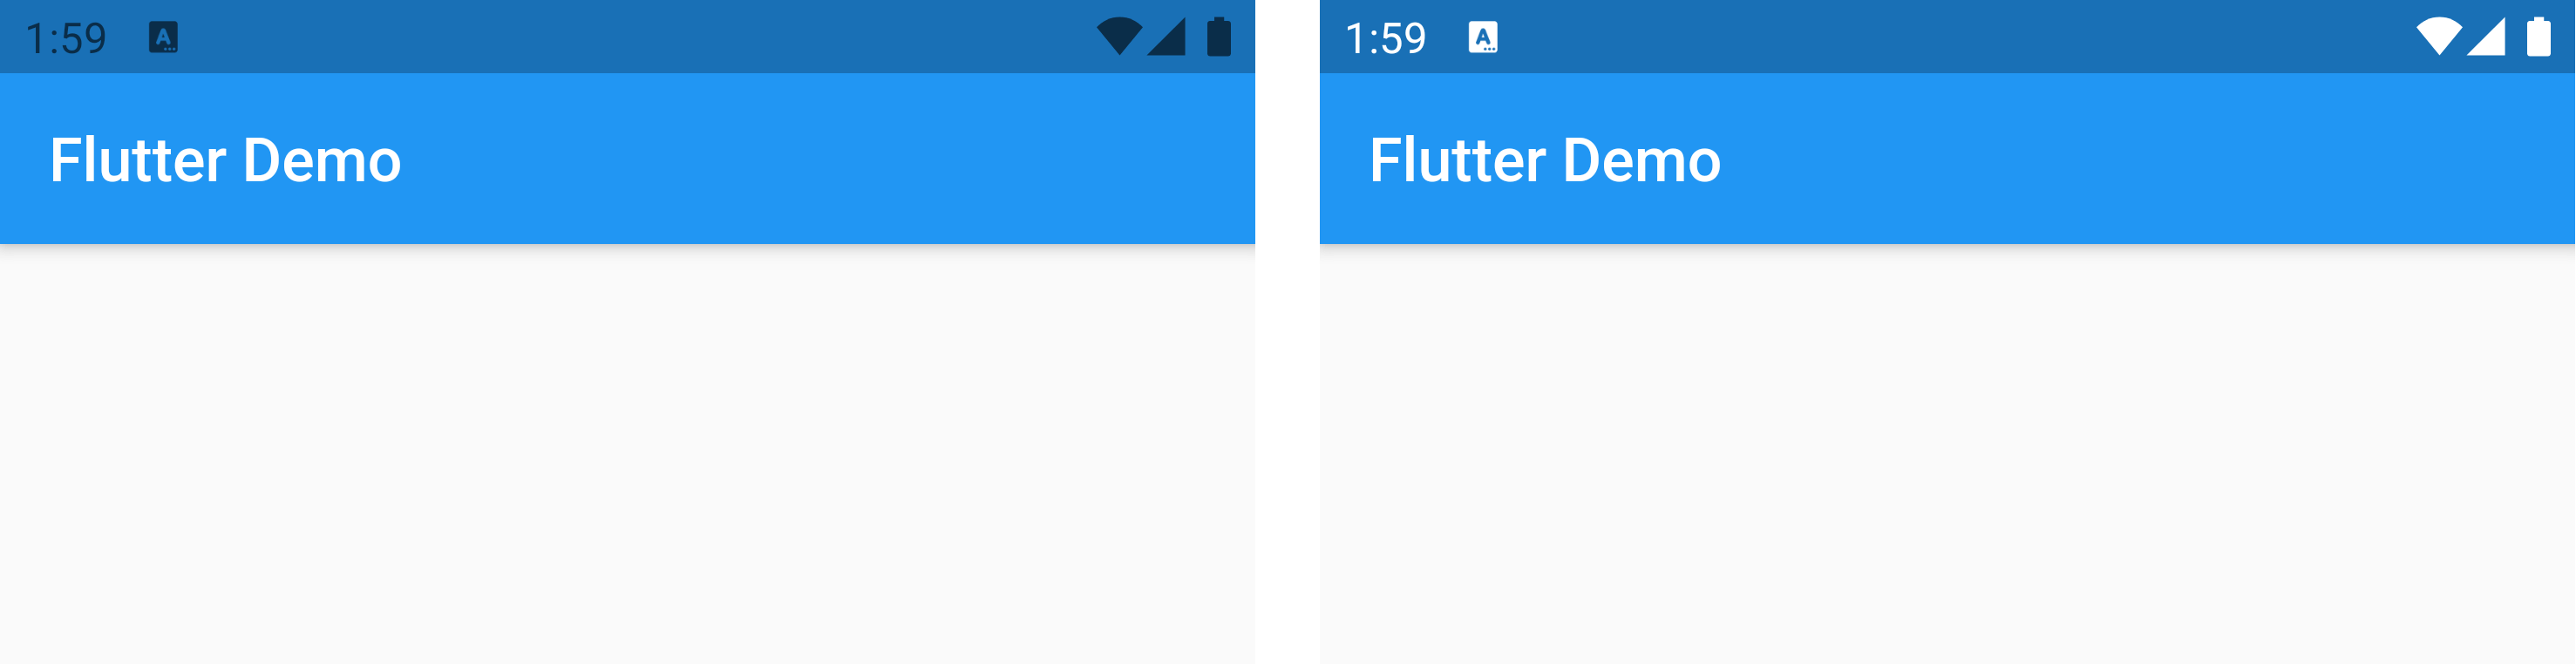 How to change status bar text color in Flutter | Sarunw